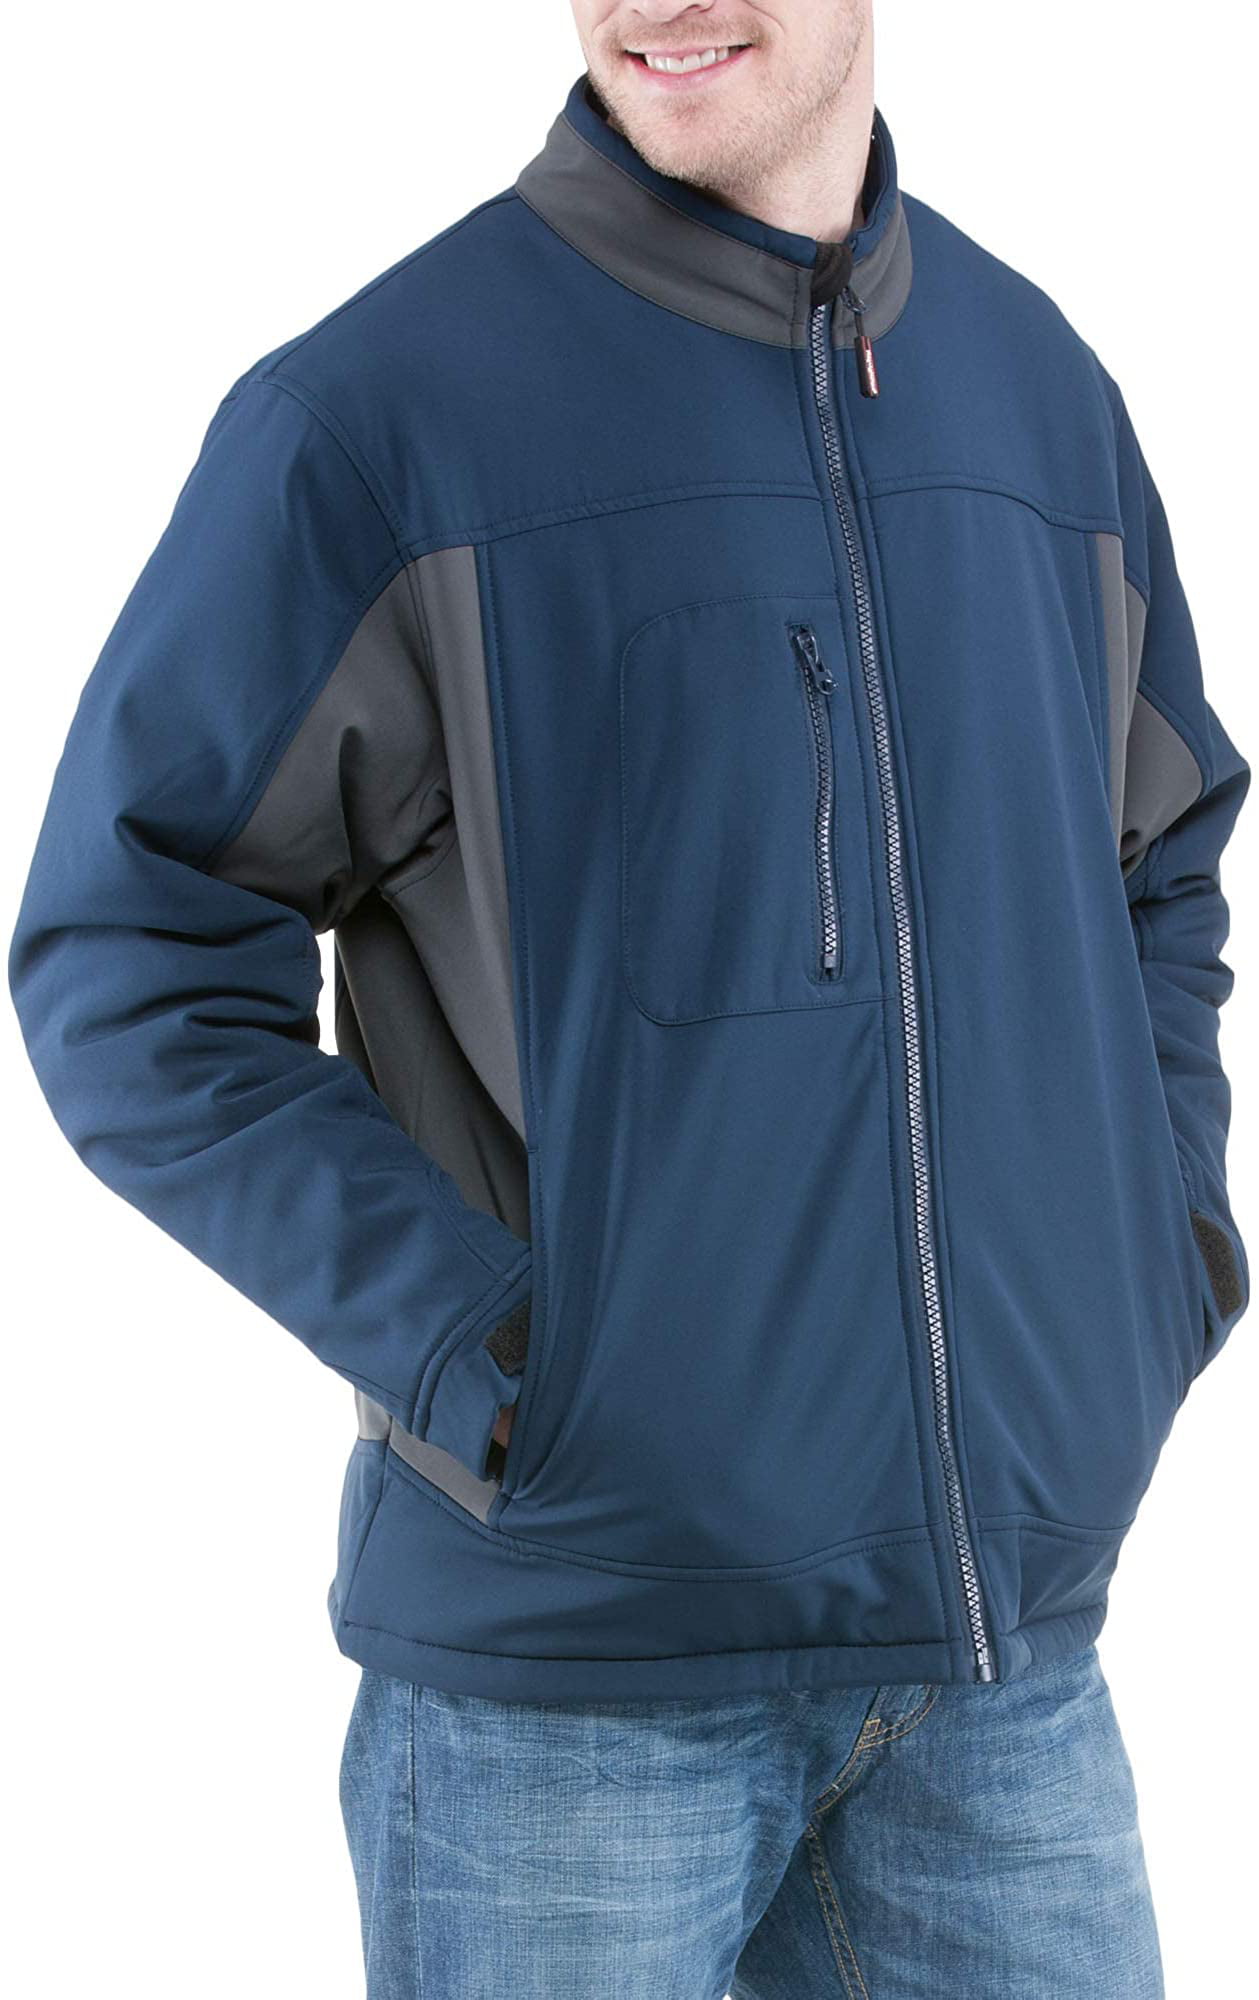 RefrigiWear Mens Windproof Water-Resistant Insulated Softshell Jacket 